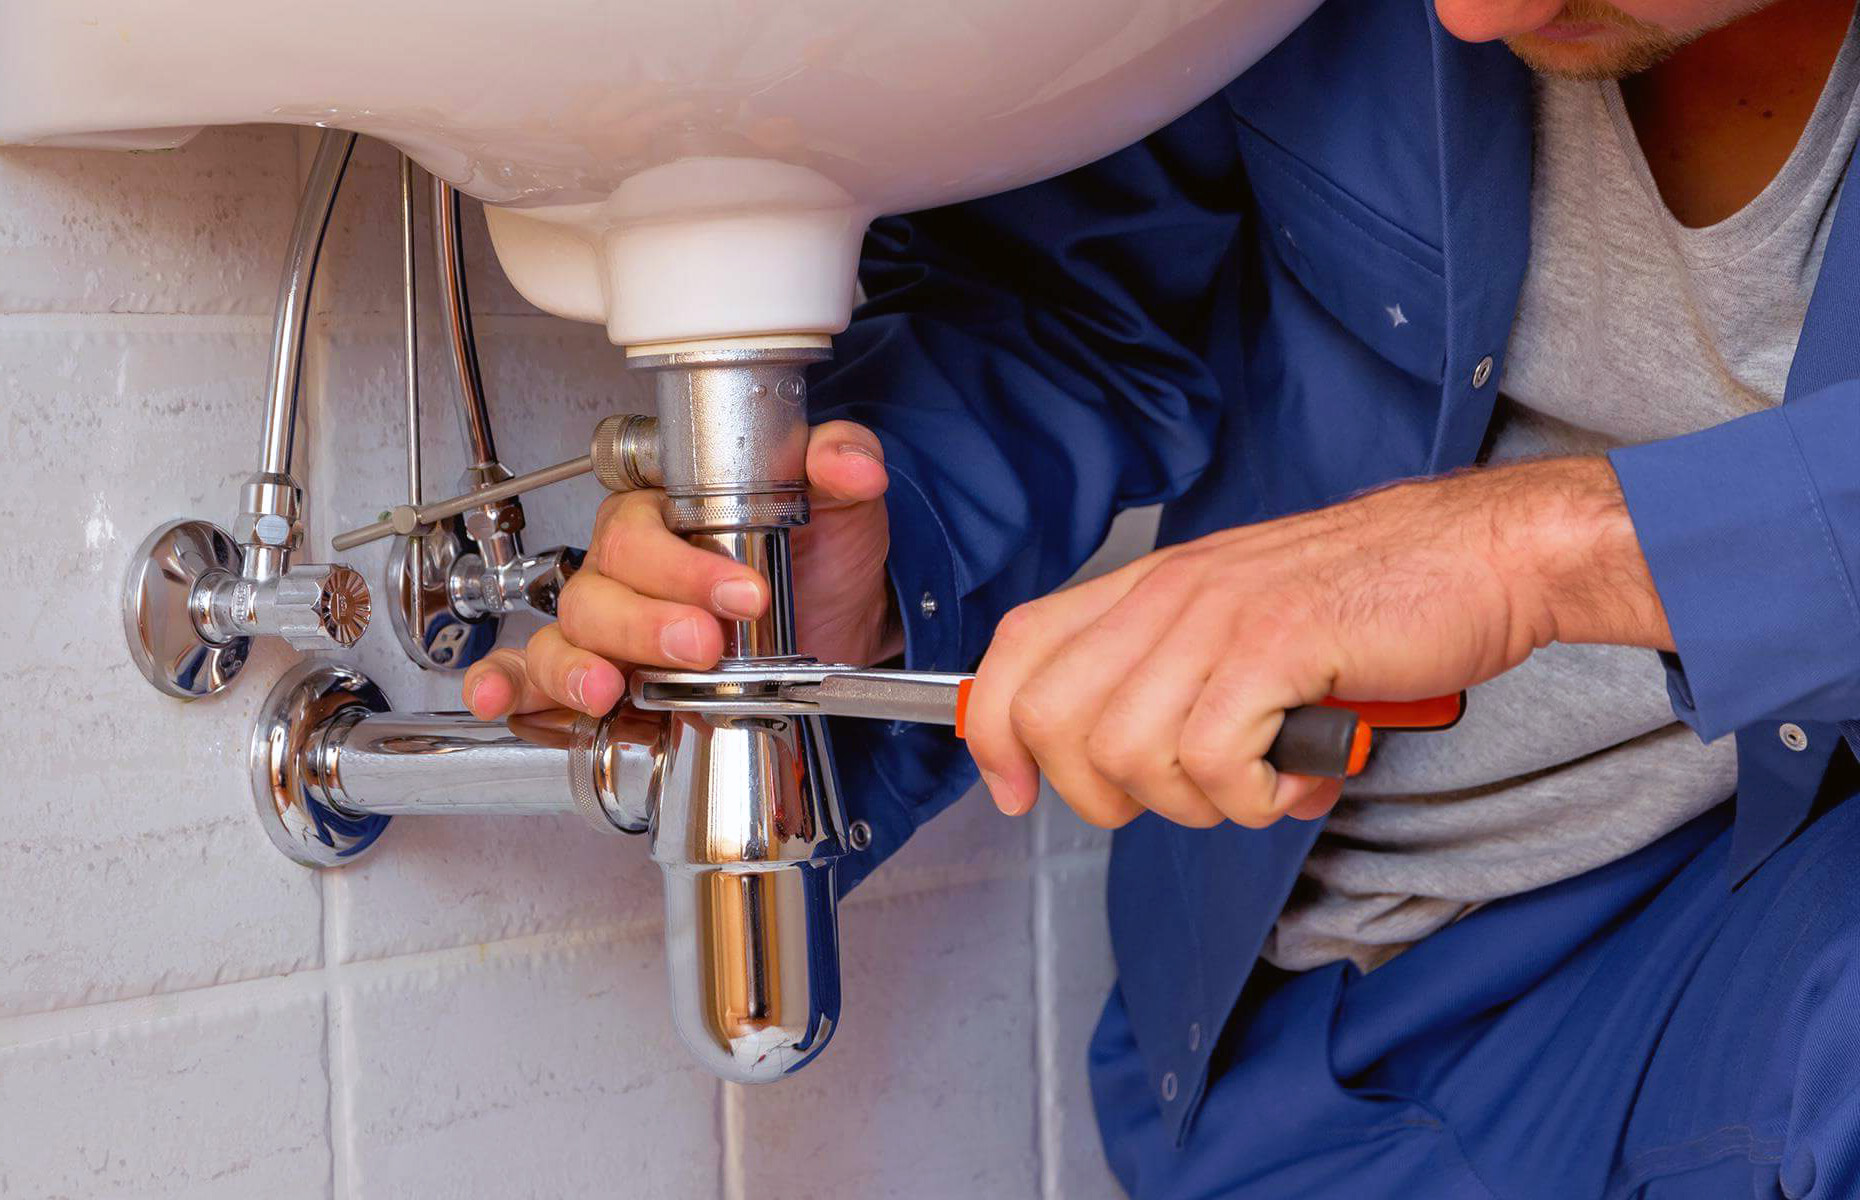 What Makes Hutchins Plumbing And Gas Stand Out?